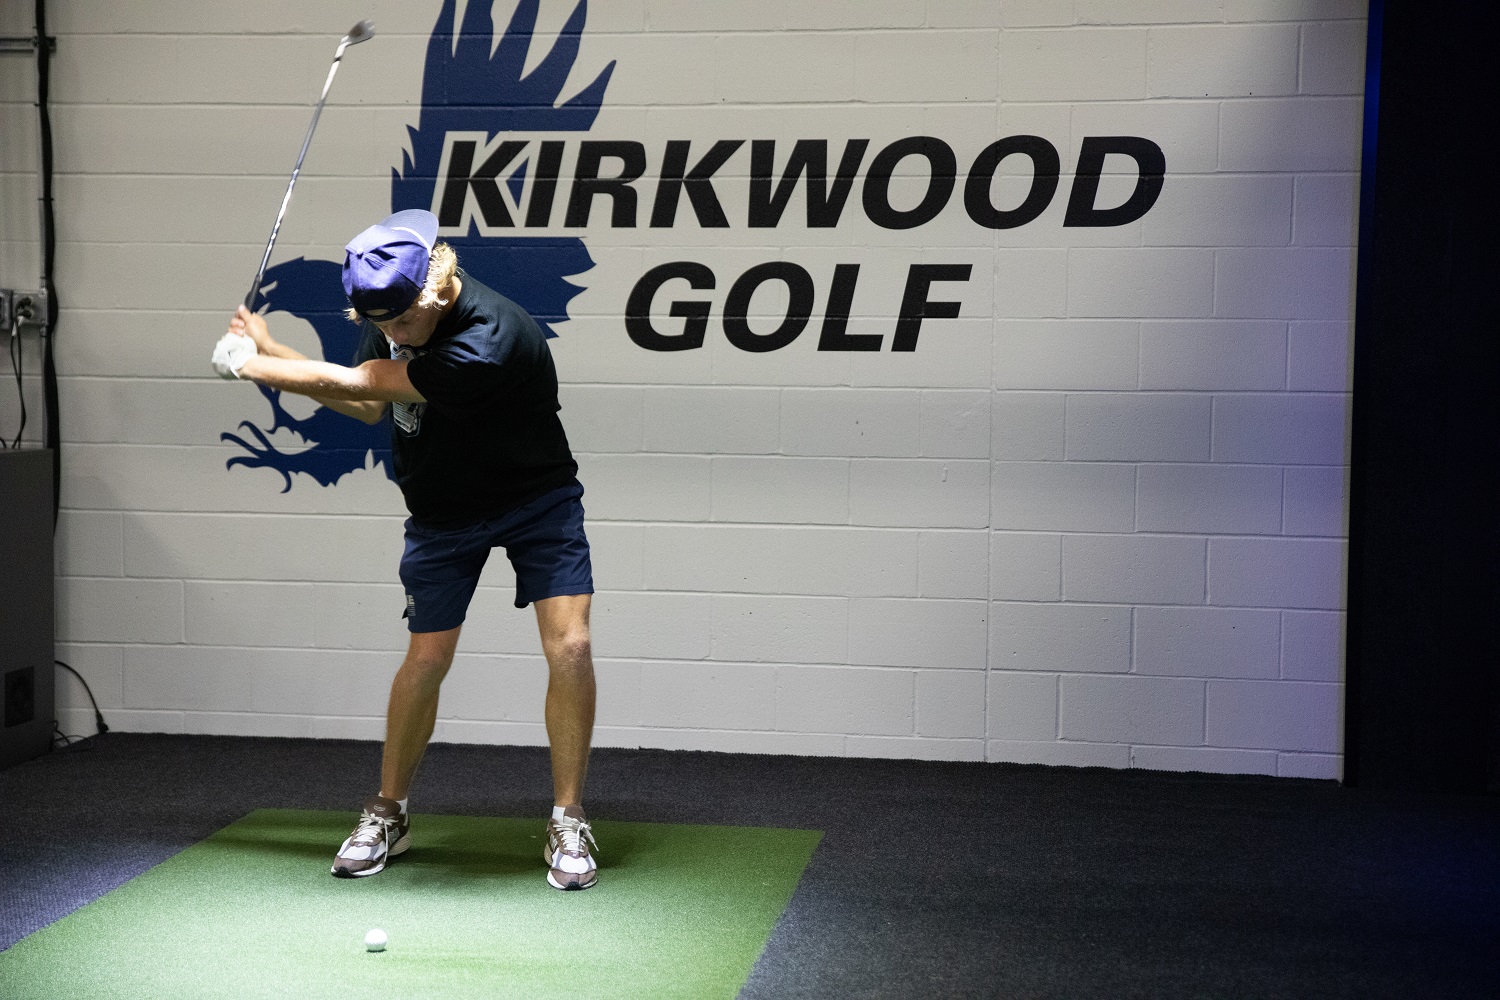 Gannon Hall, business major and a player for the Kirkwood Community College golf team, practices on Thursday, Sept. 28. Golfers use the Golf Simulator located in the upper section of Johnson Hall.